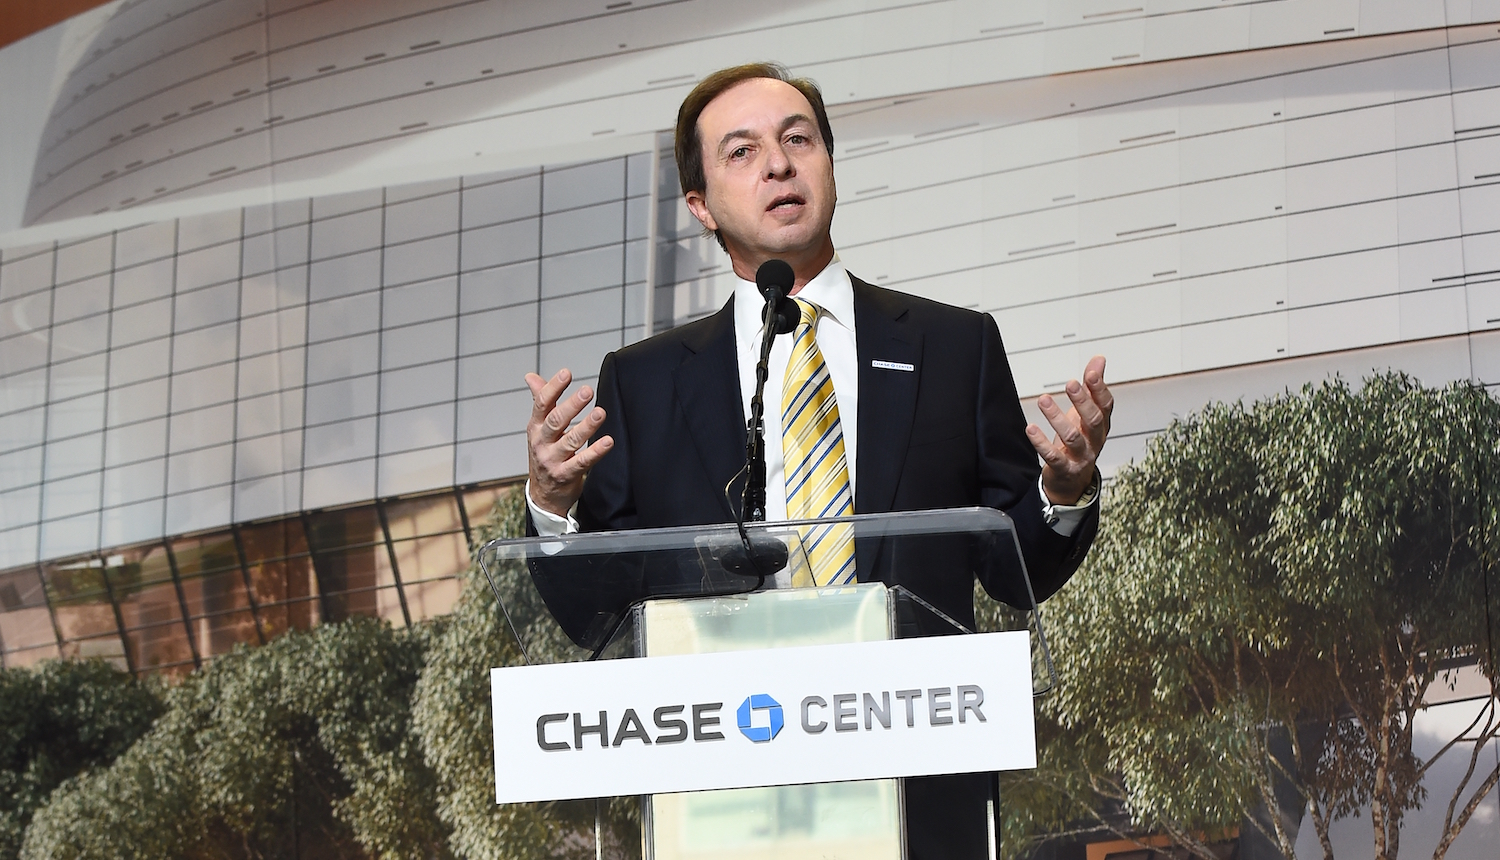 OAKLAND, CA - JANUARY 17: Joe Lacob of the Golden State Warriors speaks to the crowd during the Golden State Warriors Chase Arena groundbreaking ceremony on January 17, 2017 in Oakland, California. NOTE TO USER: User expressly acknowledges and agrees that, by downloading and or using this photograph, user is consenting to the terms and conditions of Getty Images License Agreement. Mandatory Copyright Notice: Copyright 2017 NBAE (Photo by Noah Graham/NBAE via Getty Images)